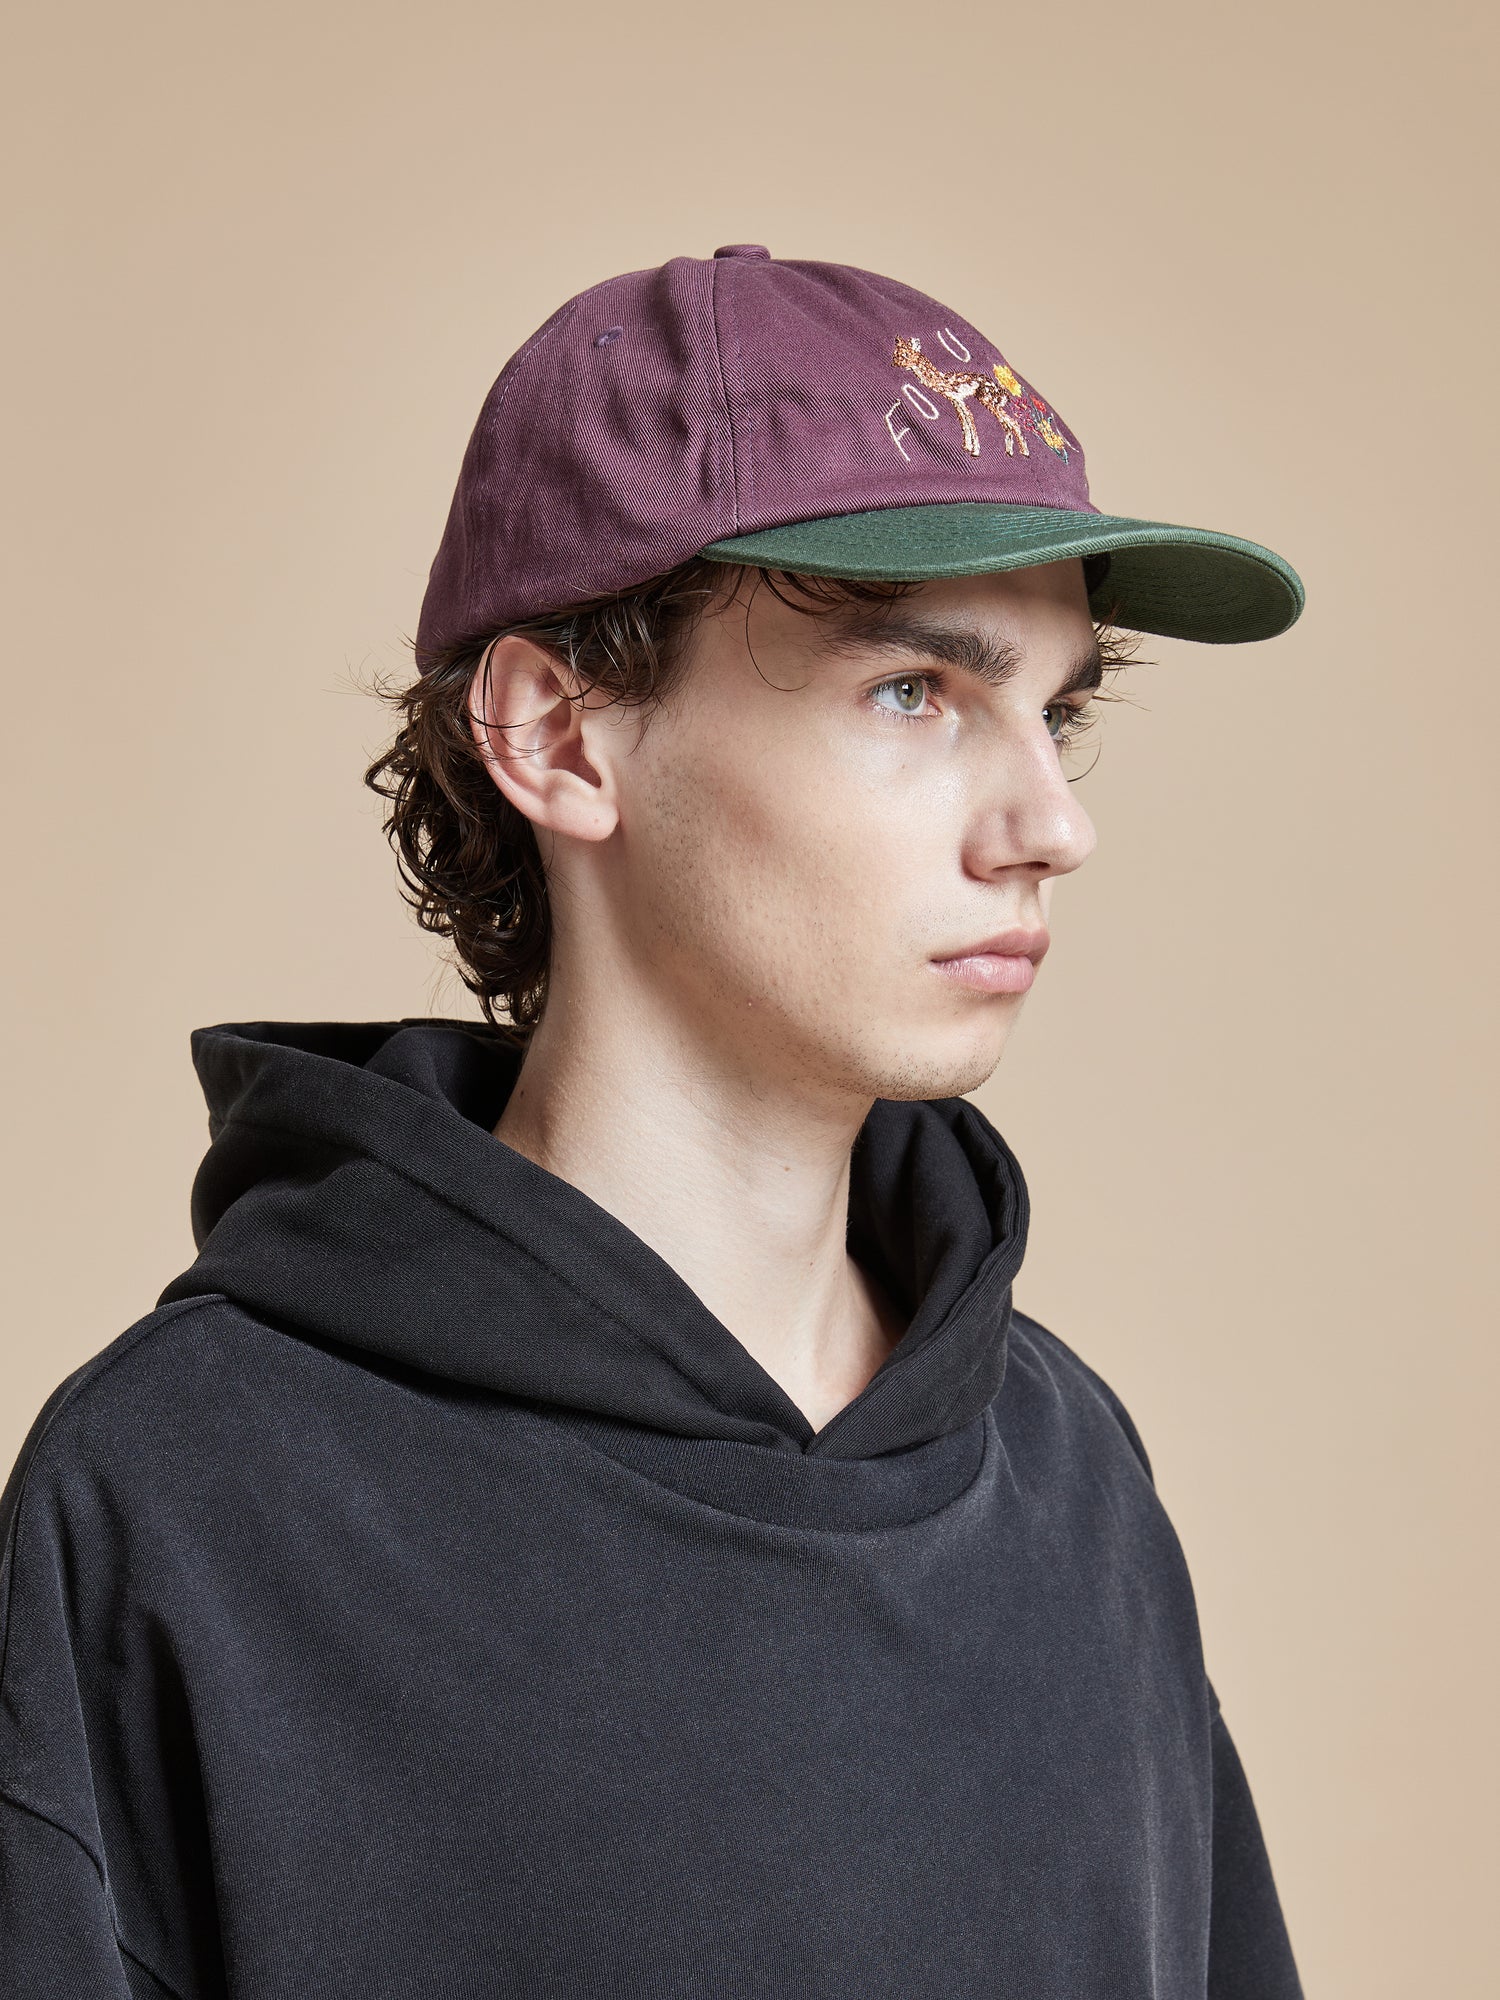 A young man wearing a Found Flower Deer Cap and black hoodie.